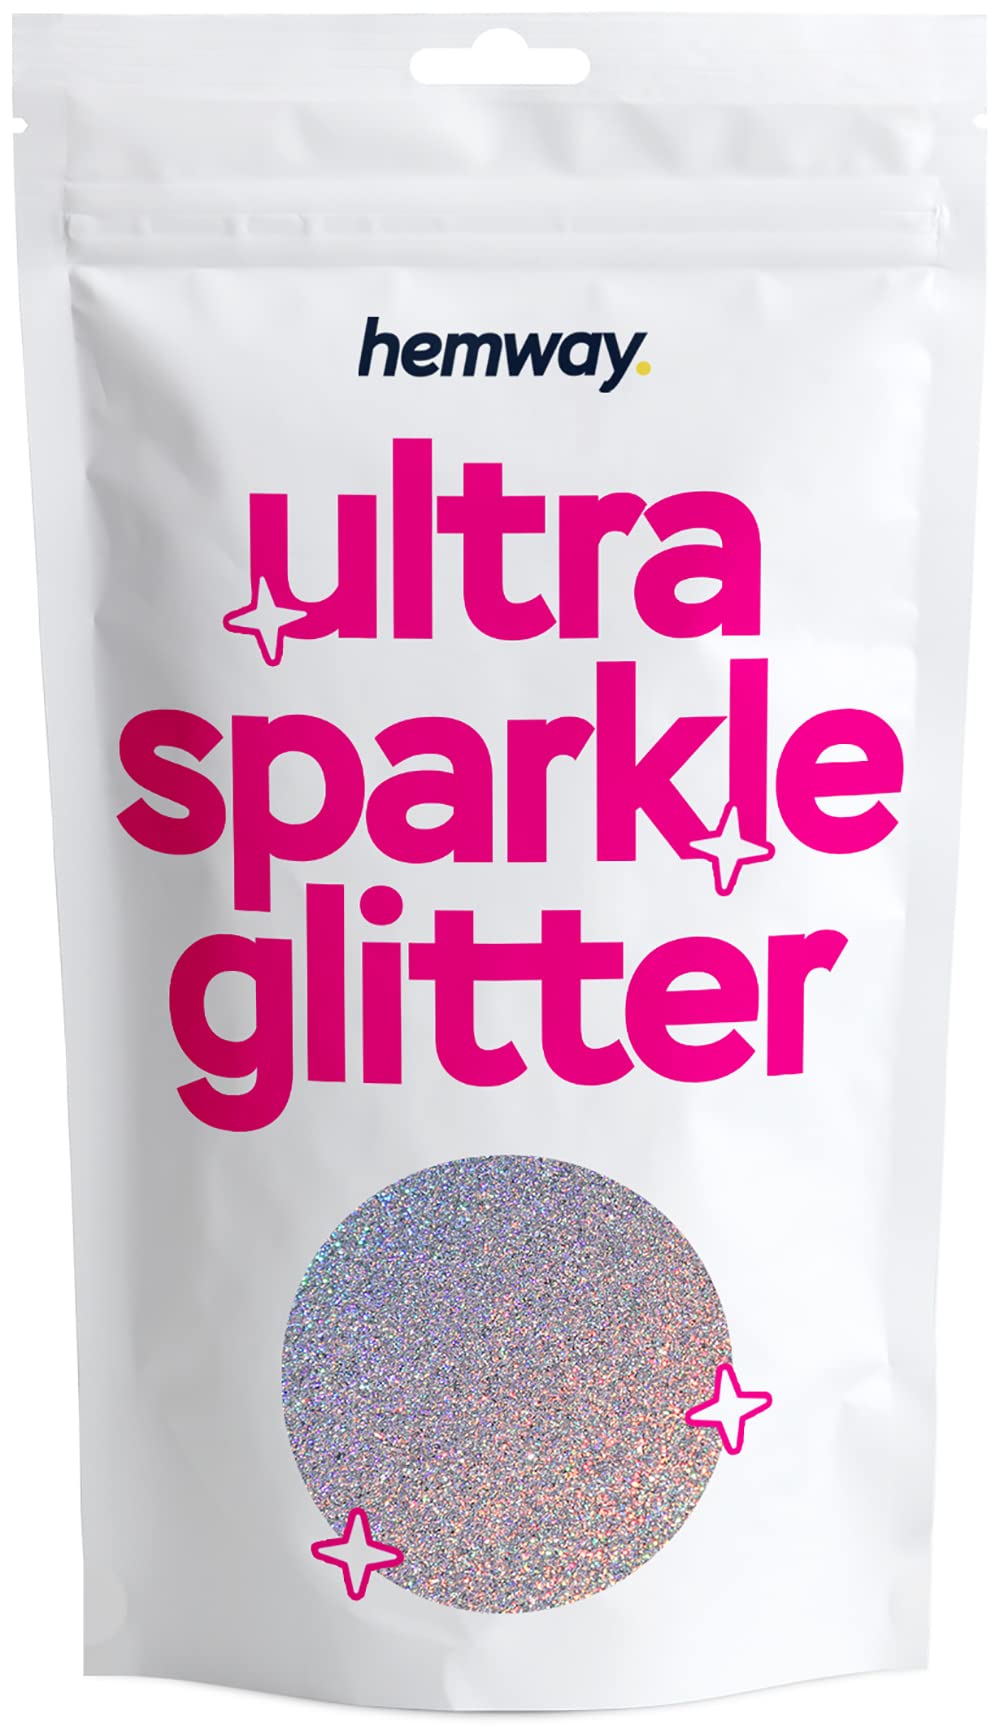 Hemway Premium Ultra Sparkle Glitter Multi Purpose Metallic Flake for Nail Art, Cosmetic Graded, Makeup, Festival, Party, Hair, Body and Eyes 100g / 3.5oz - Silver Holographic